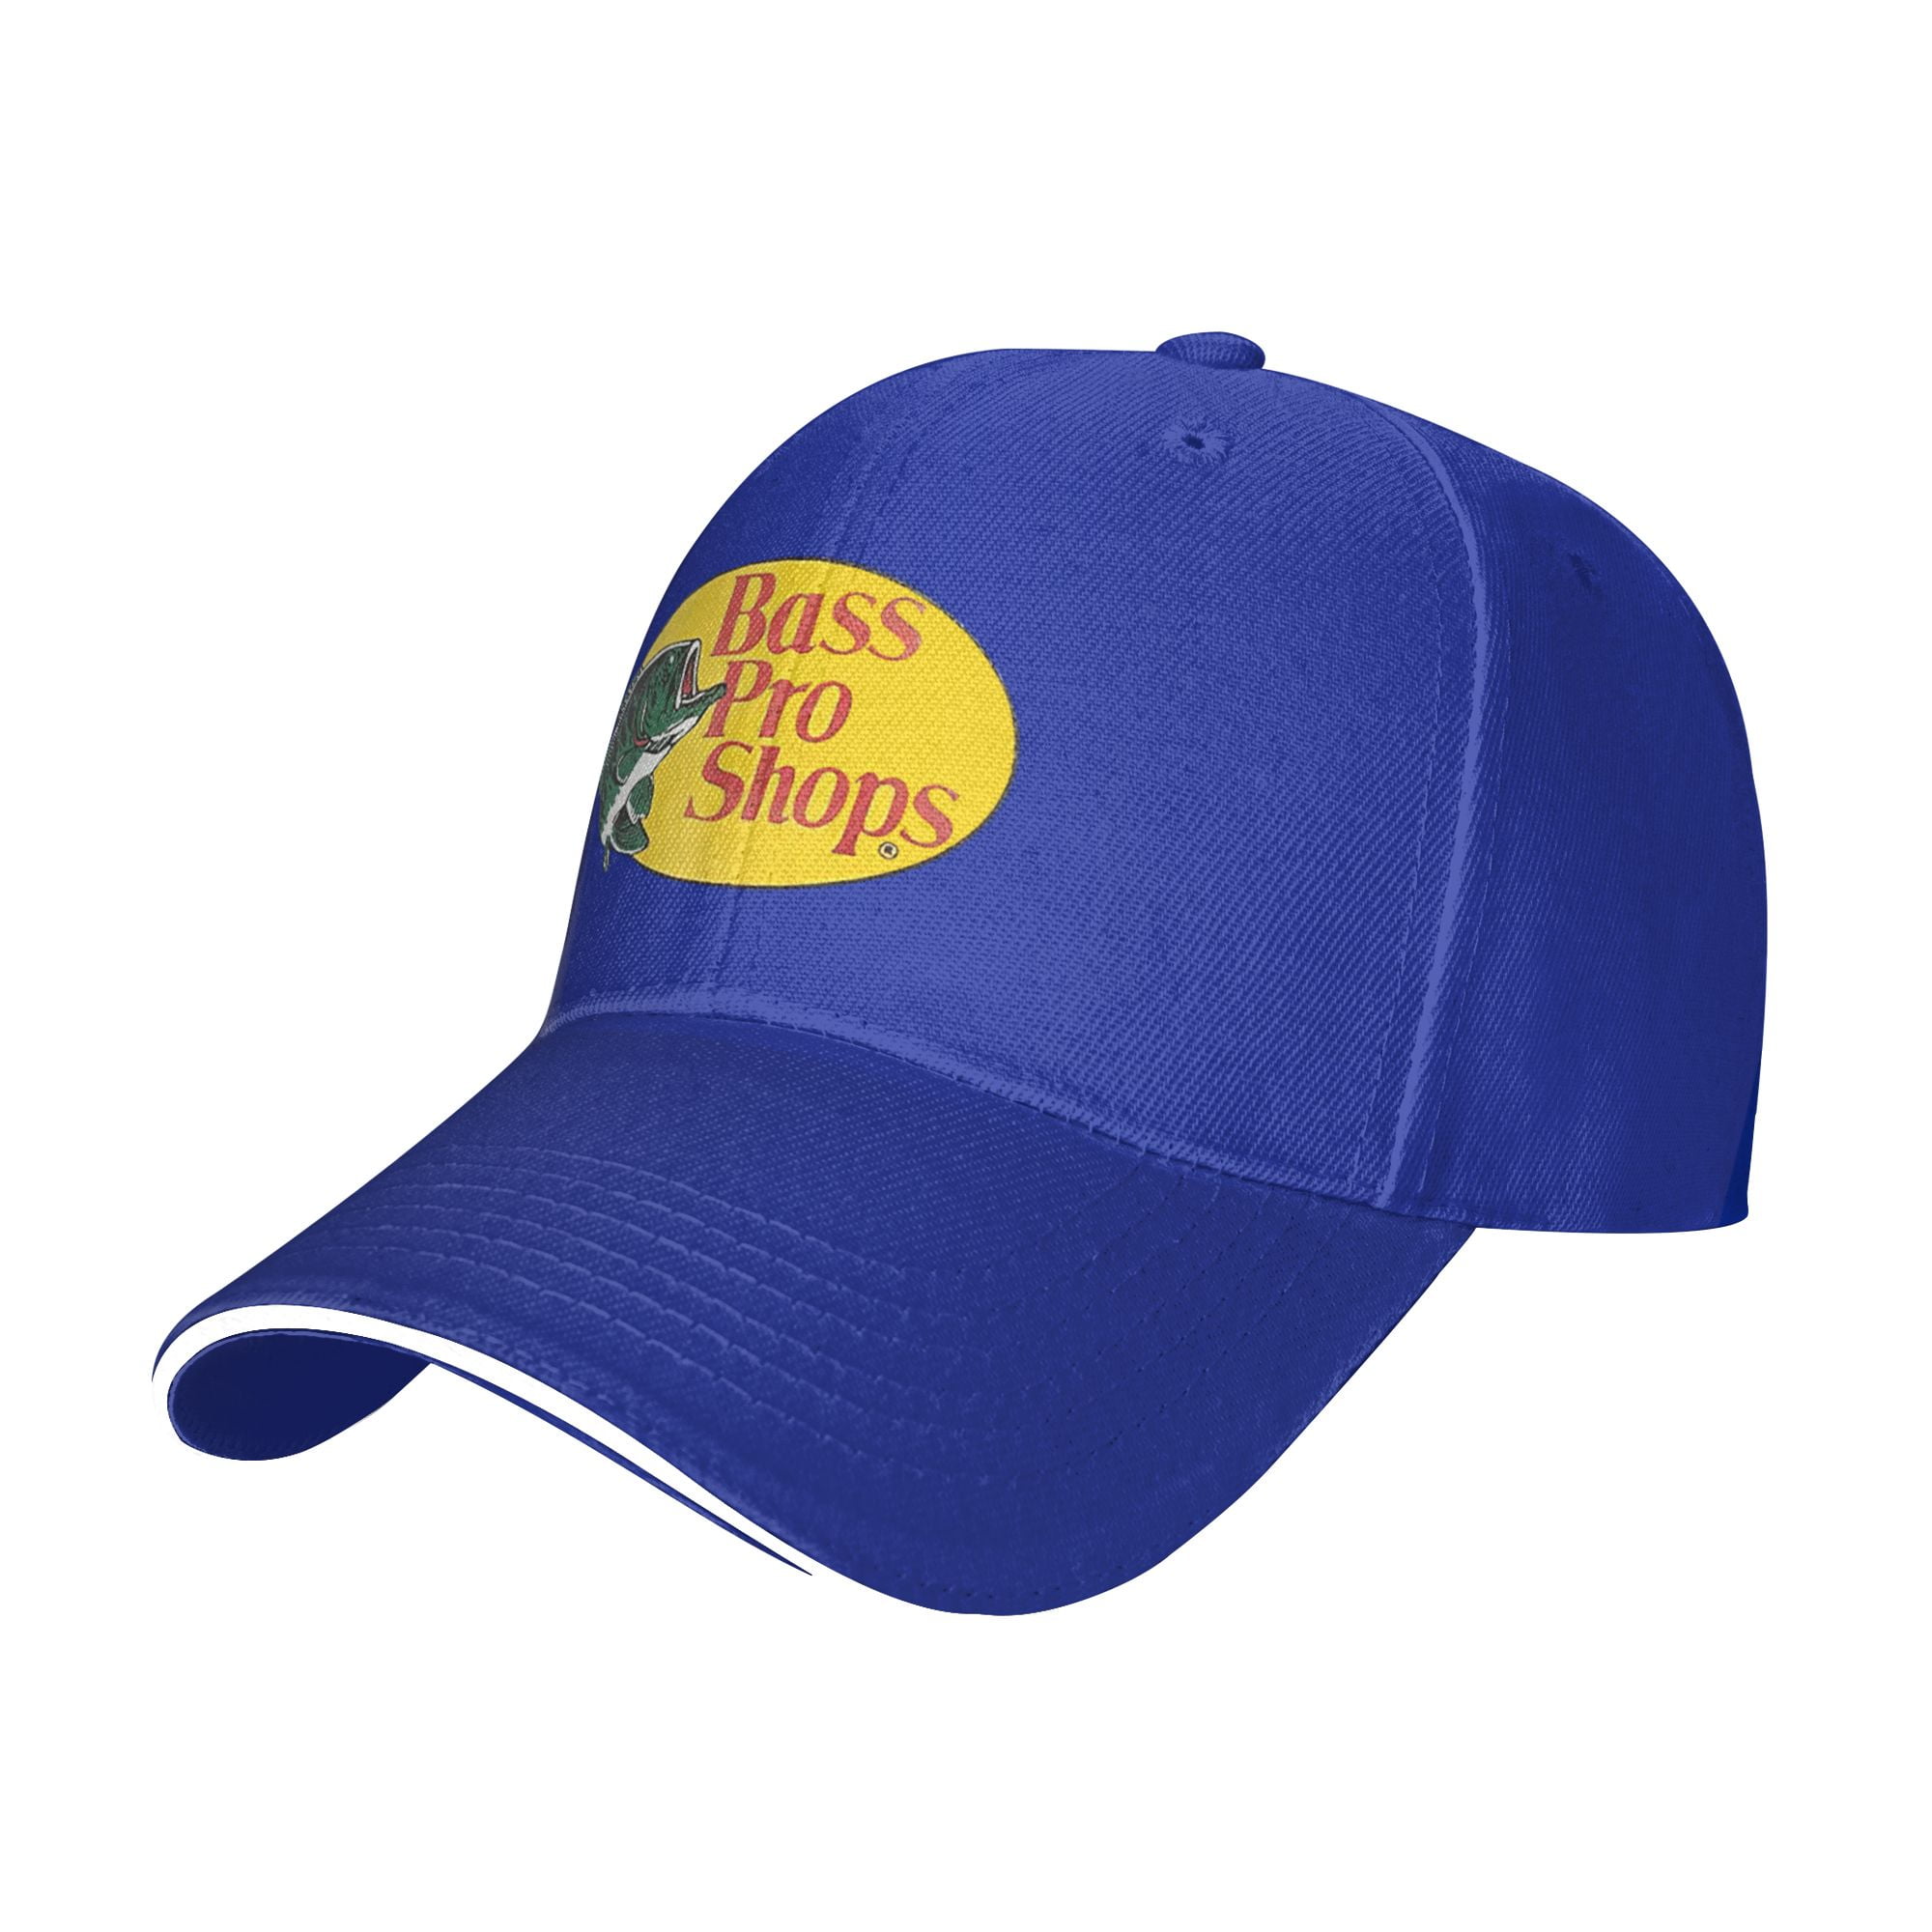 Bass Pro Shop Casquette Blue- One Size Fits All Snapback Closure - Great  for Hunting & Fishing 